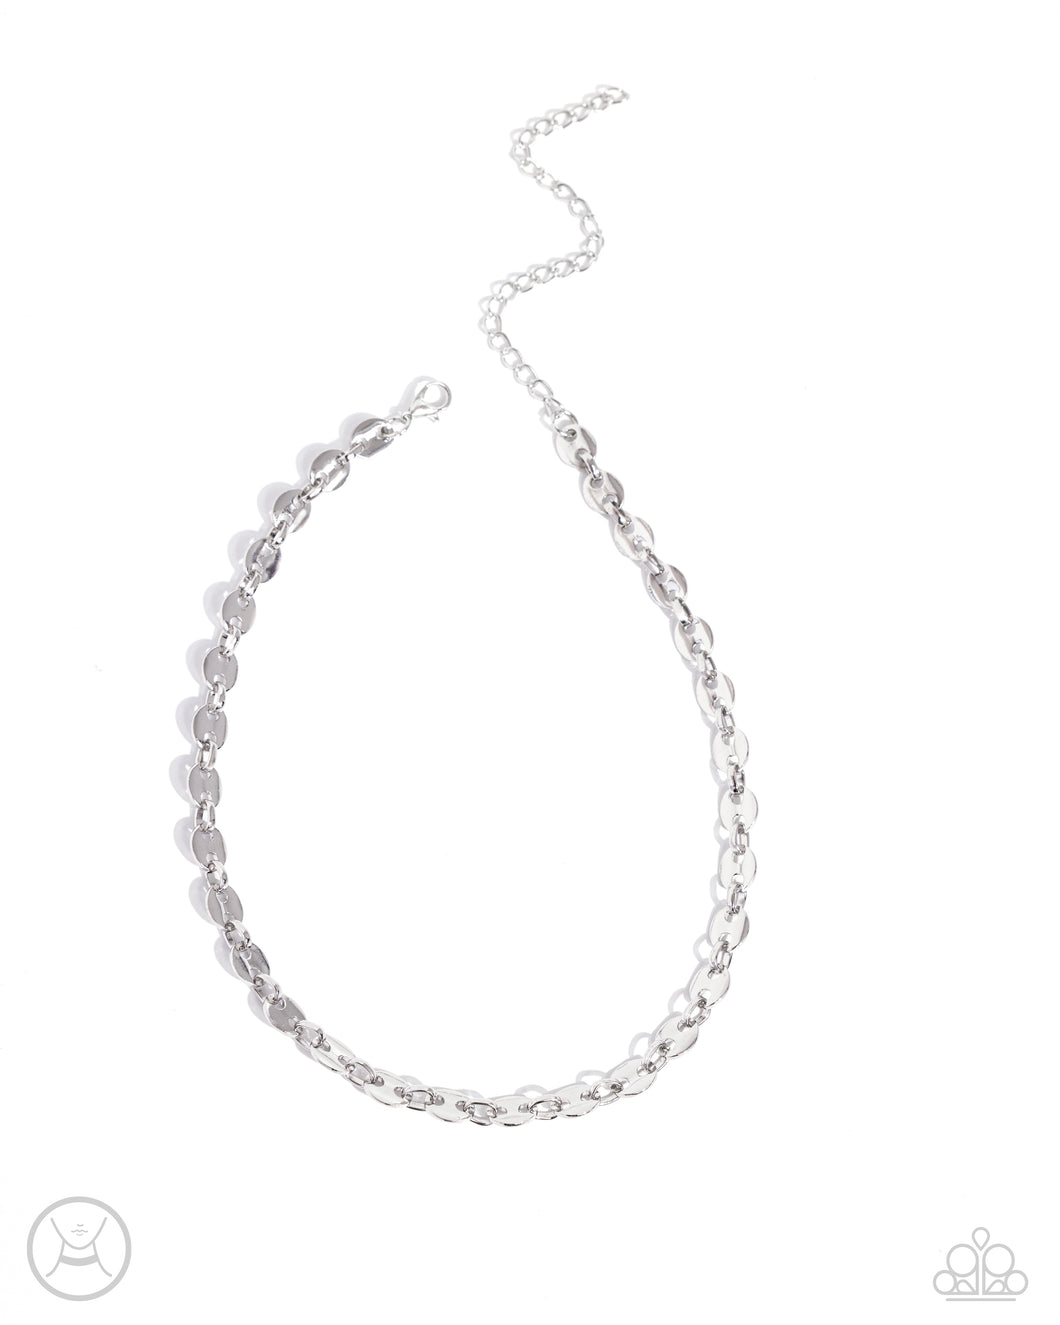 Abstract Advocate - Silver (Choker) Necklace